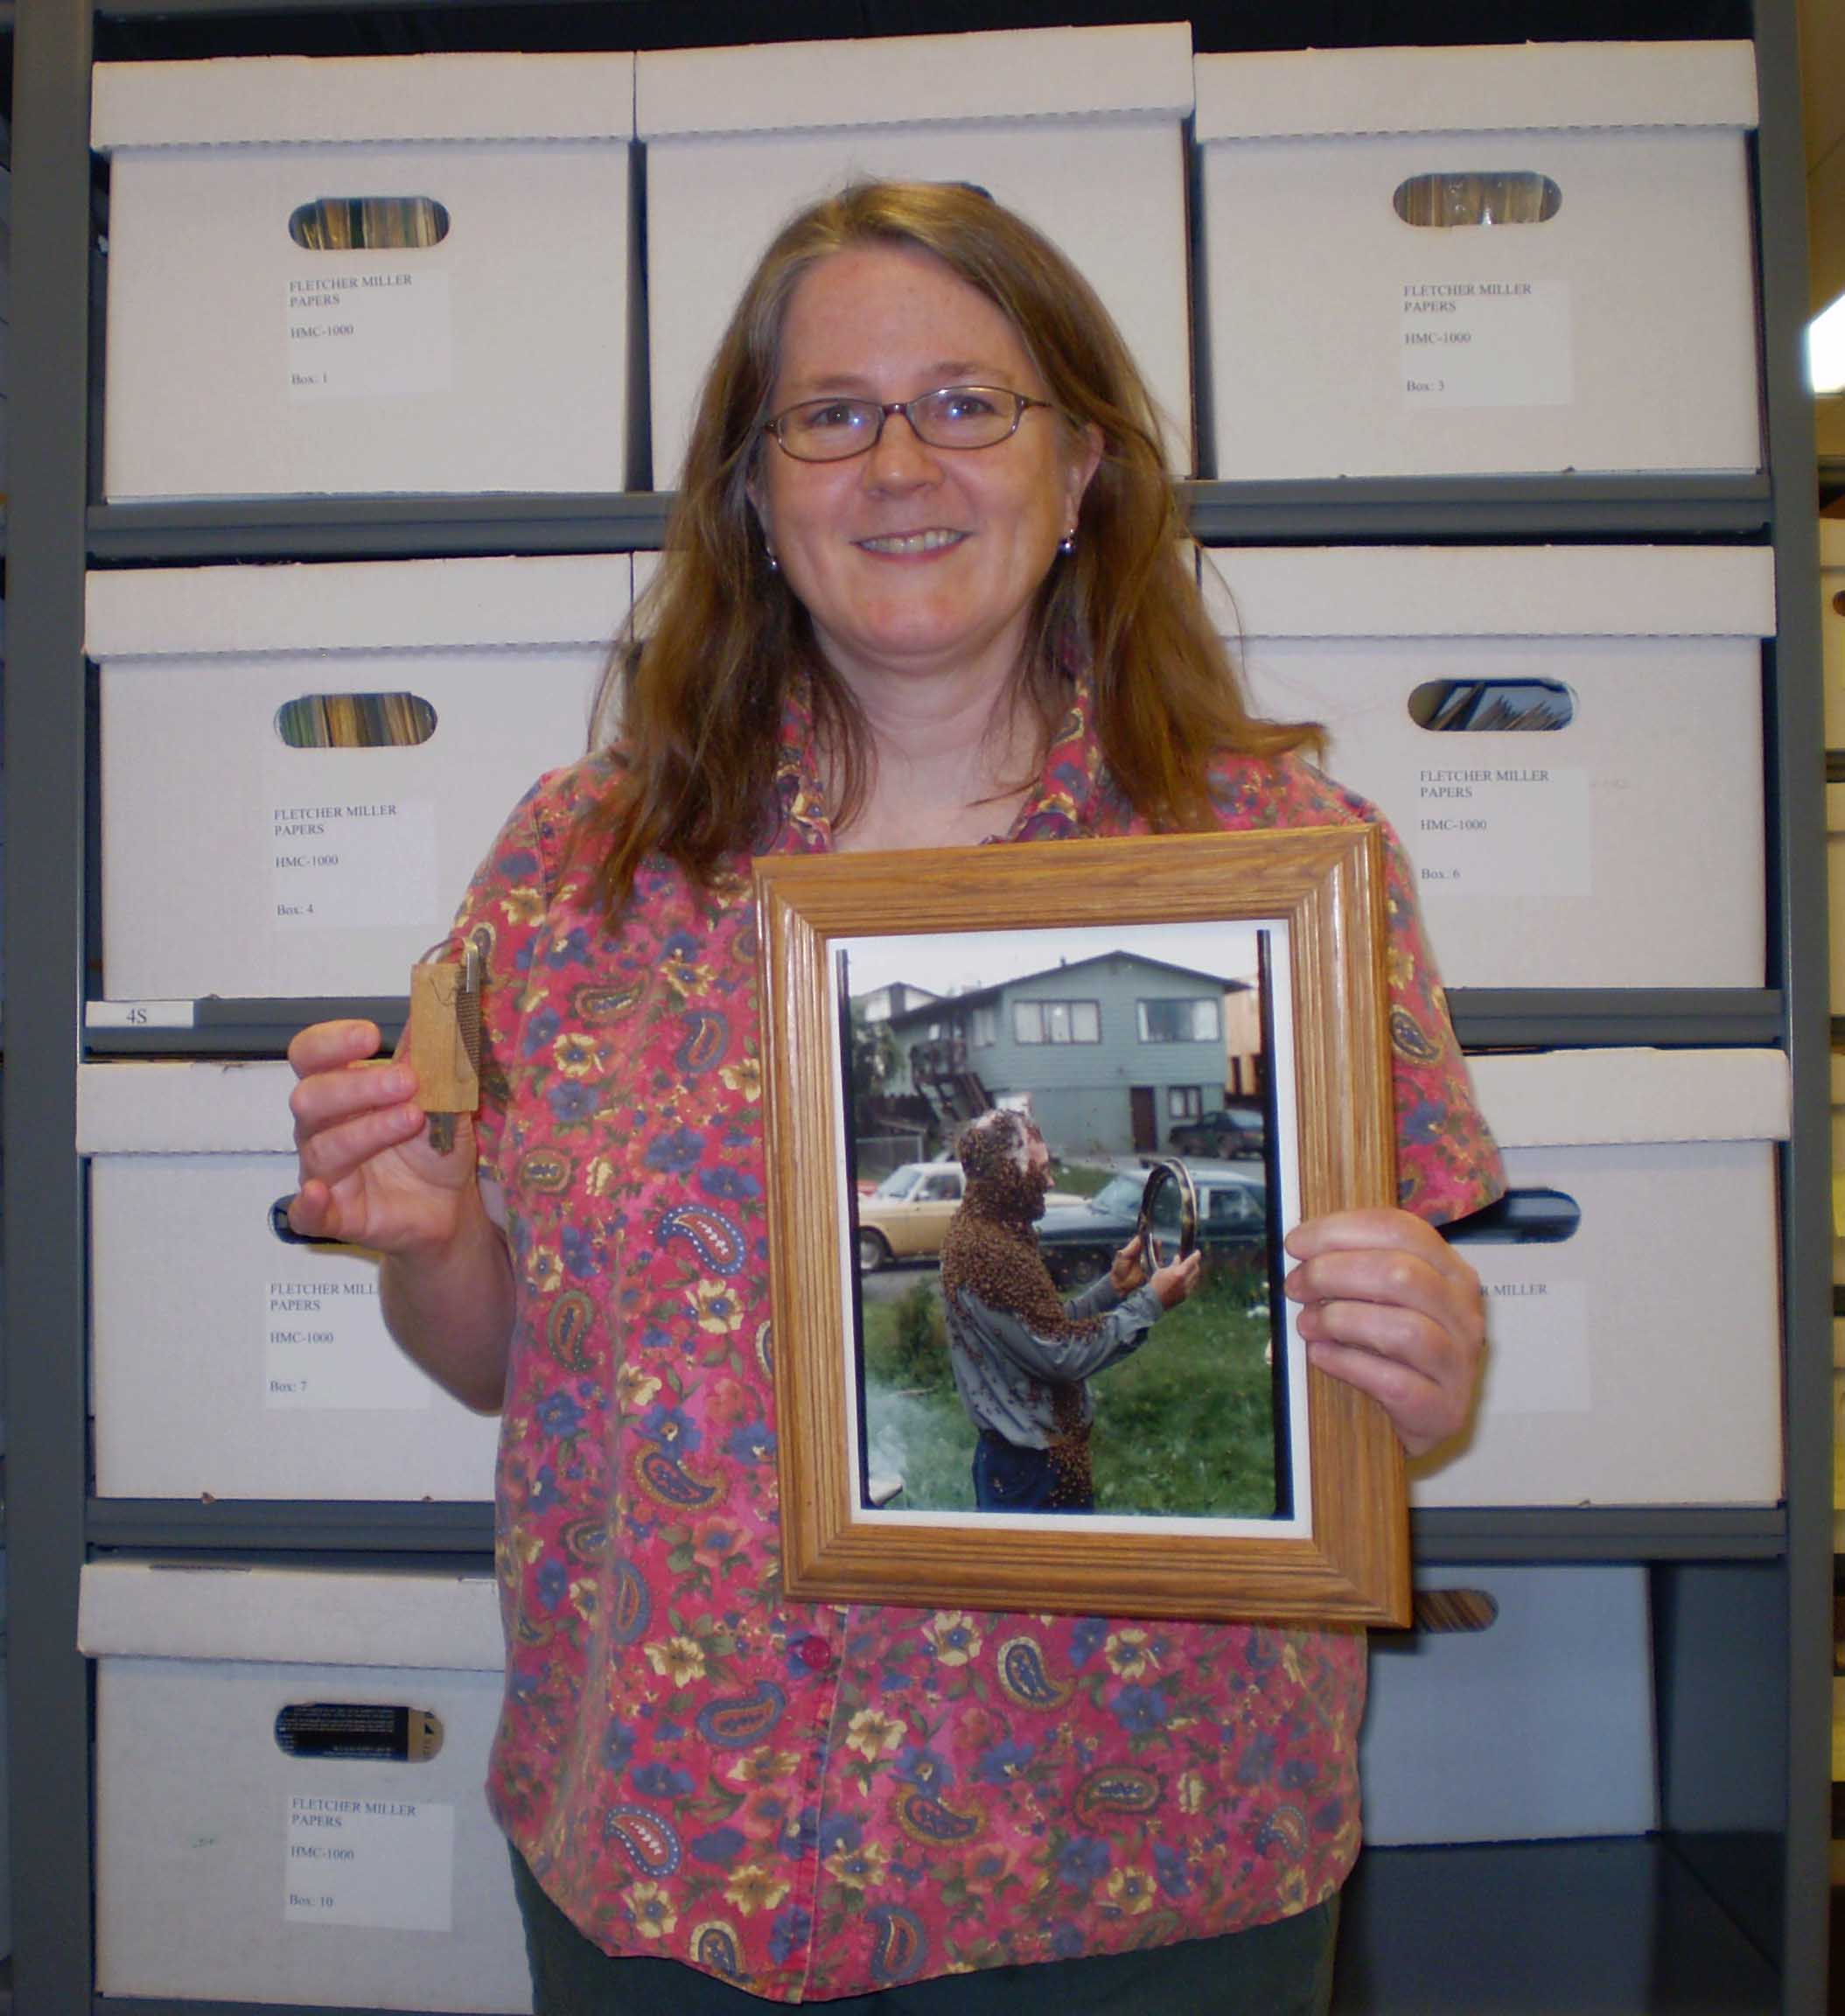 Sigrid Brudie holding queen cage and a portrait of Fletcher Miller with a "bee beard."